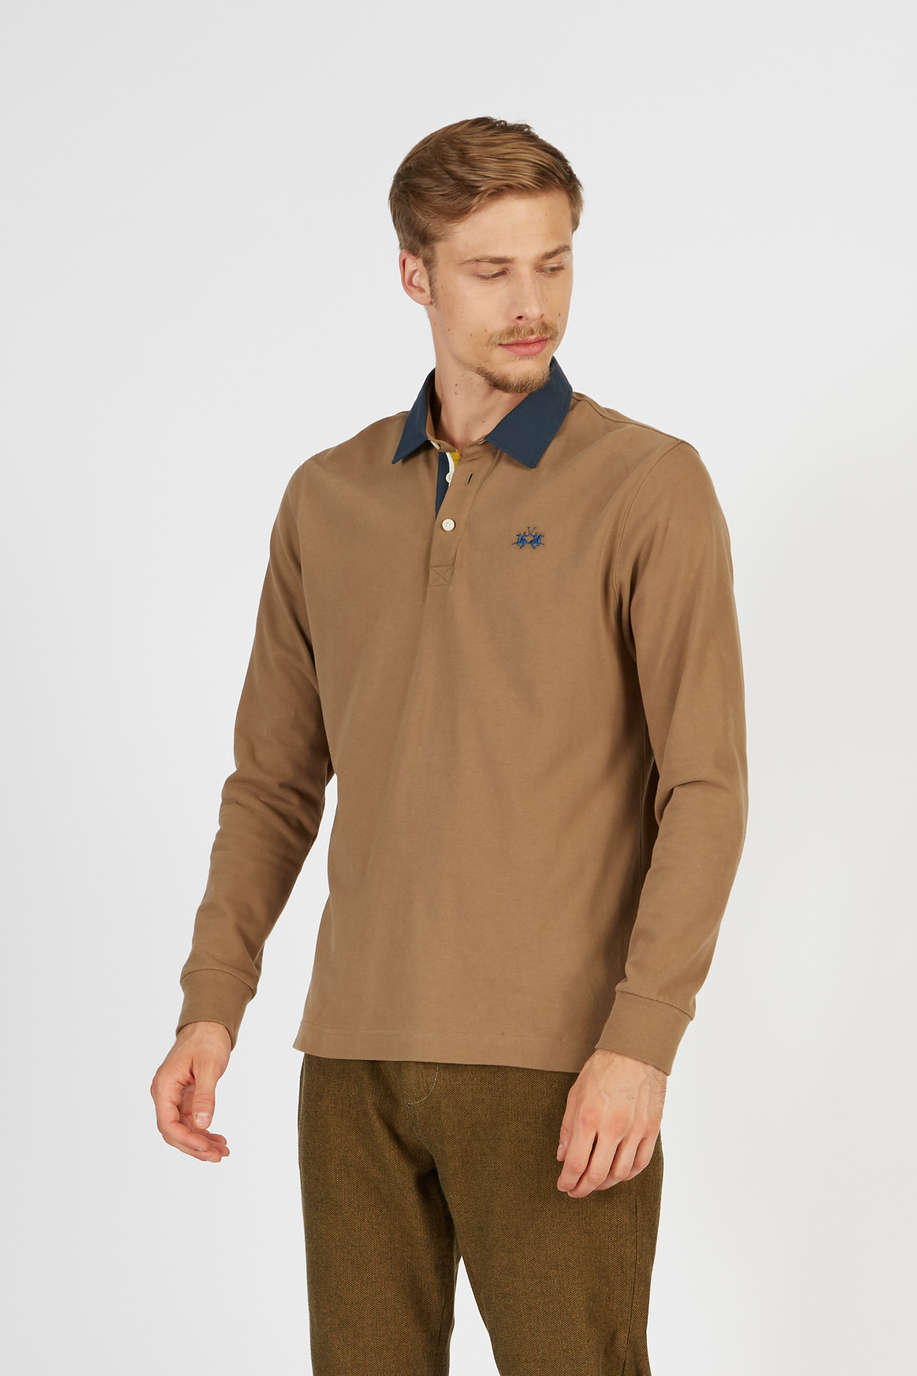 Men’s polo shirt with long sleeves in regular fit jersey cotton - Latest | La Martina - Official Online Shop